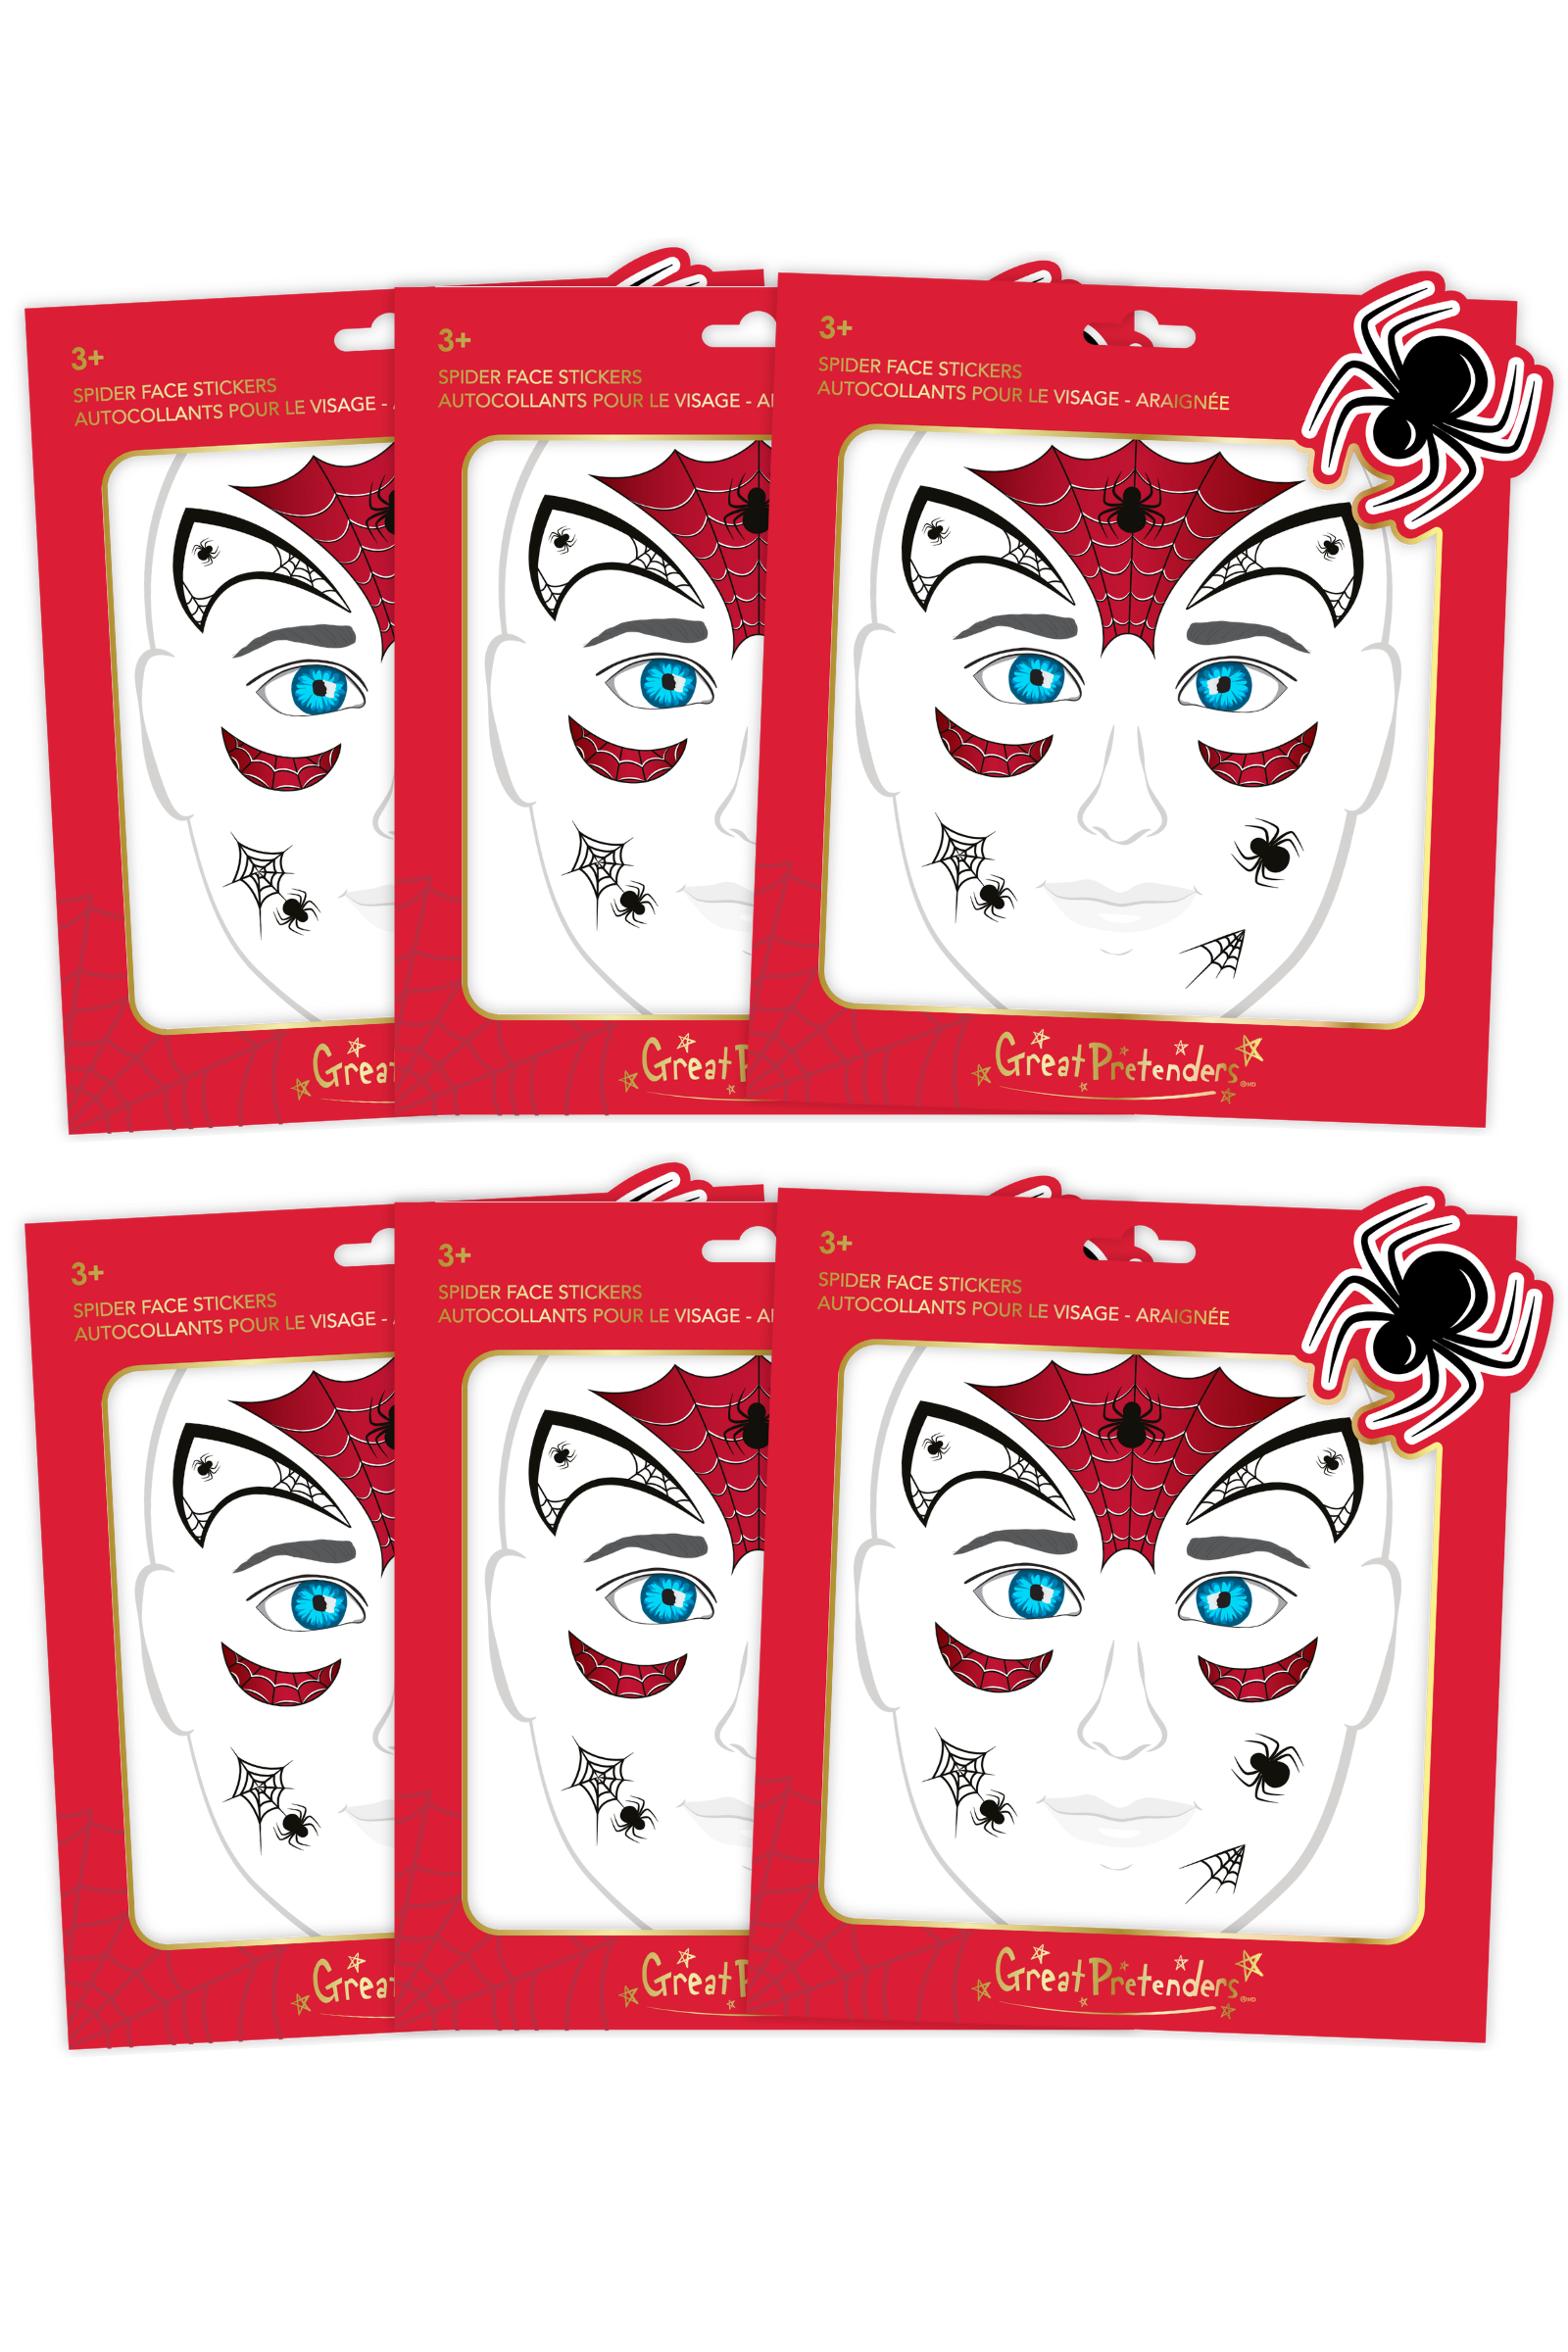 6 Packs of Spider Face Stickers